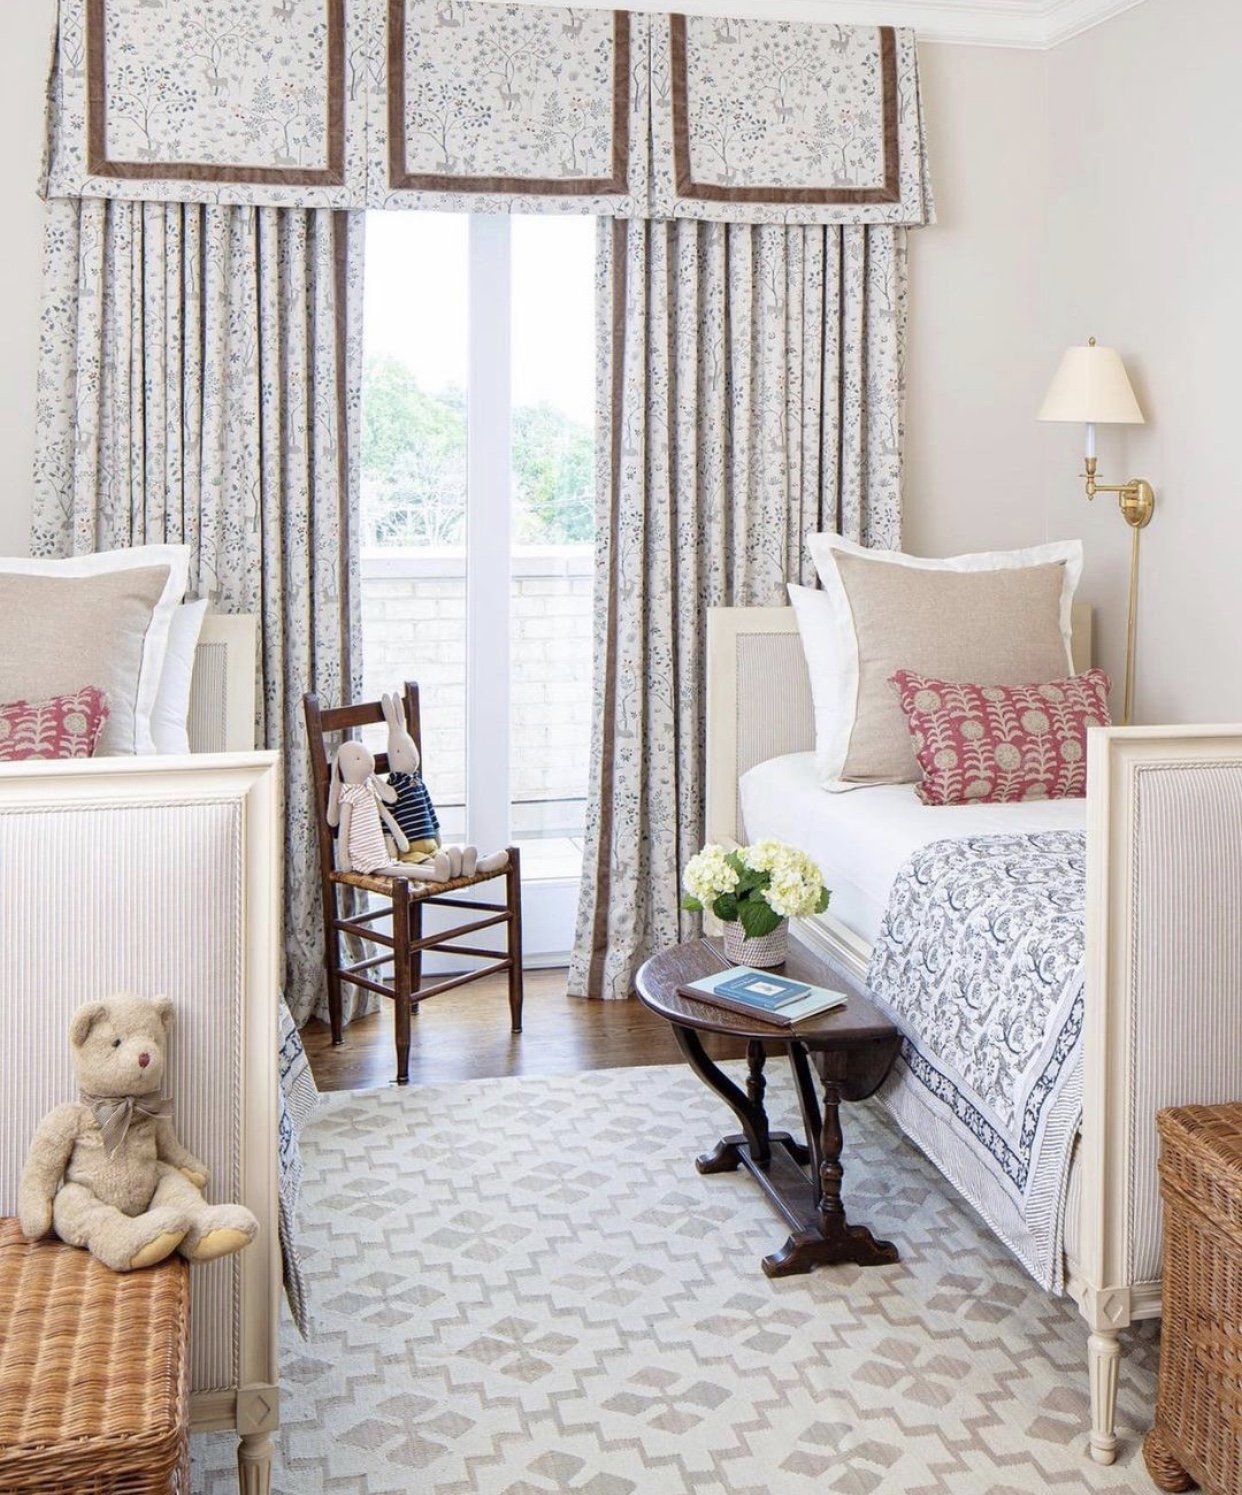 M. Carter Design | Lewis &amp; Wood (curtains) and Penny Morrison (pillows)